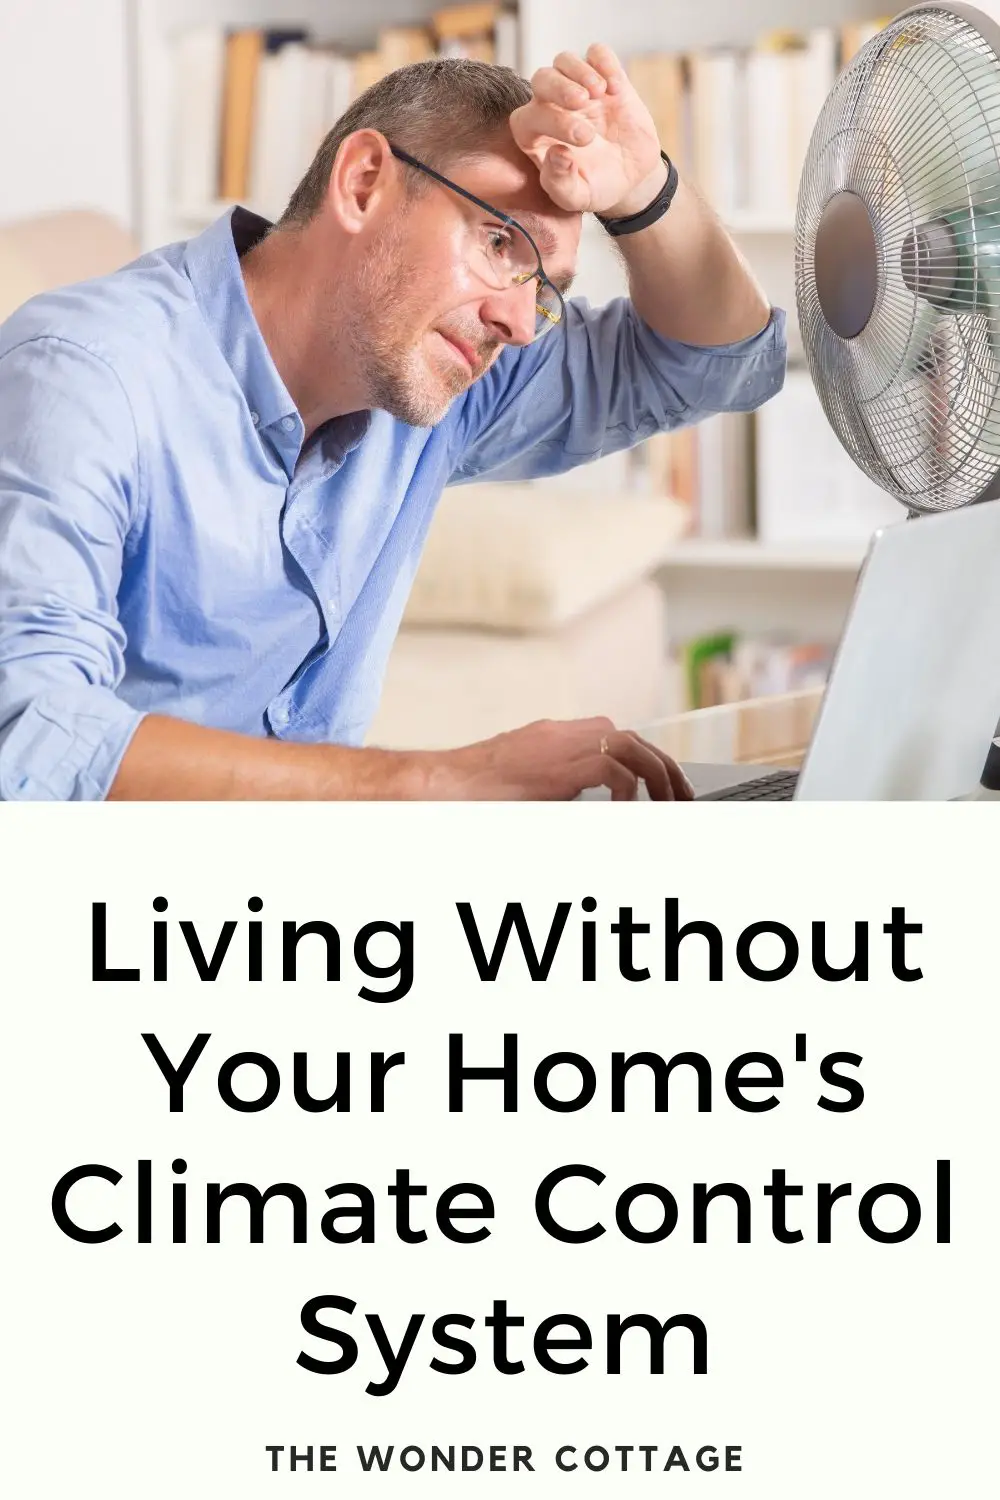 living without your home's climate control systems